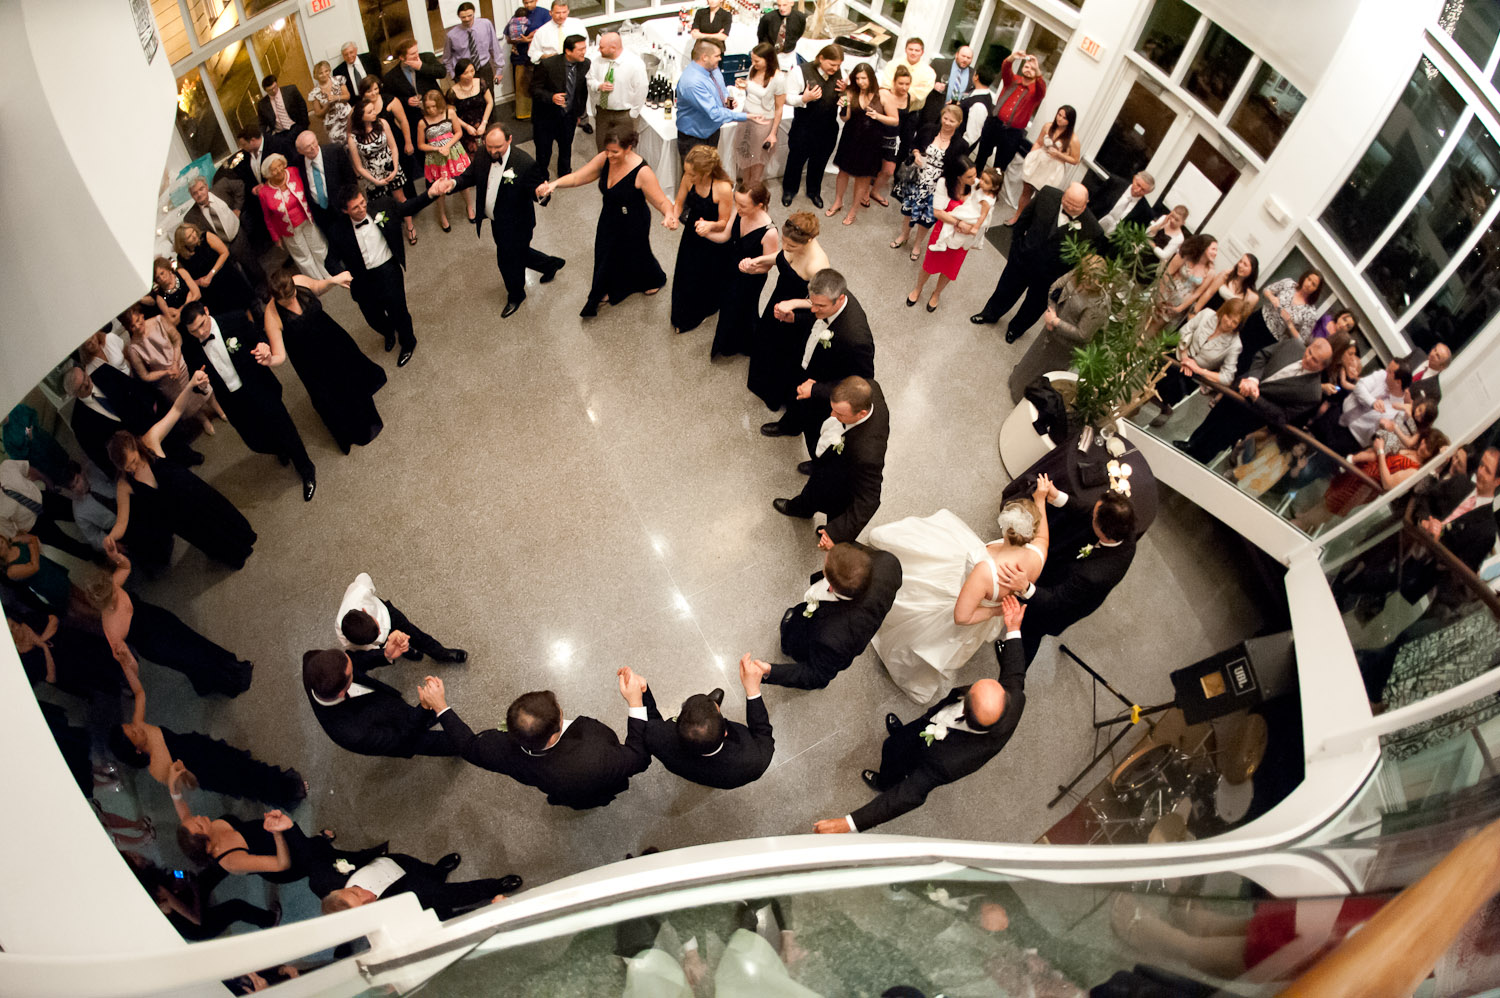 Birdseye view of the pavilion with a large group of wedding guests dancing in a circle formation